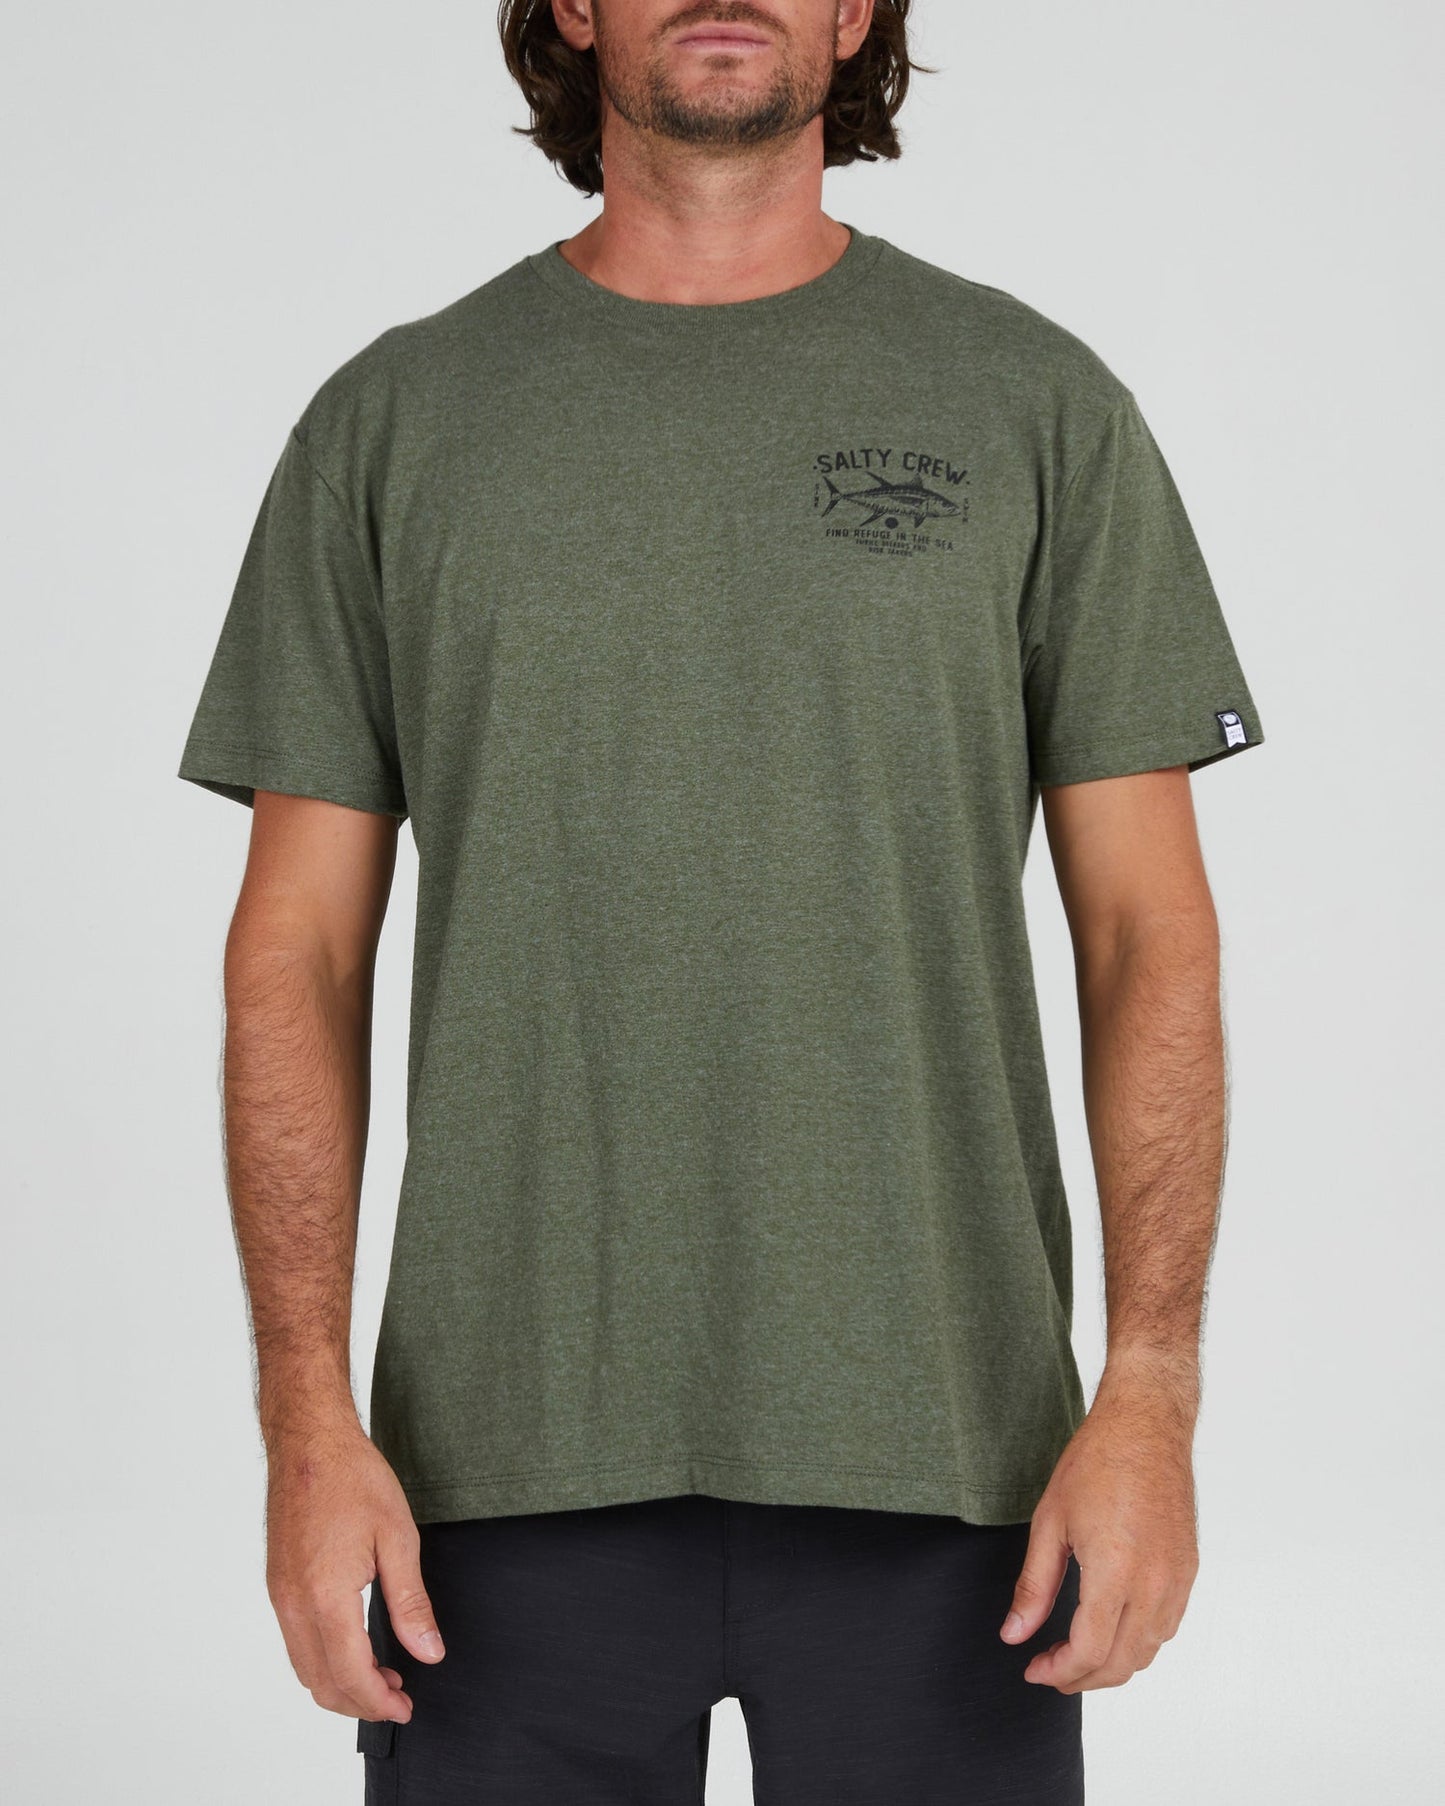 Salty Crew Market SS Tee - Heather Olive Mens T Shirt